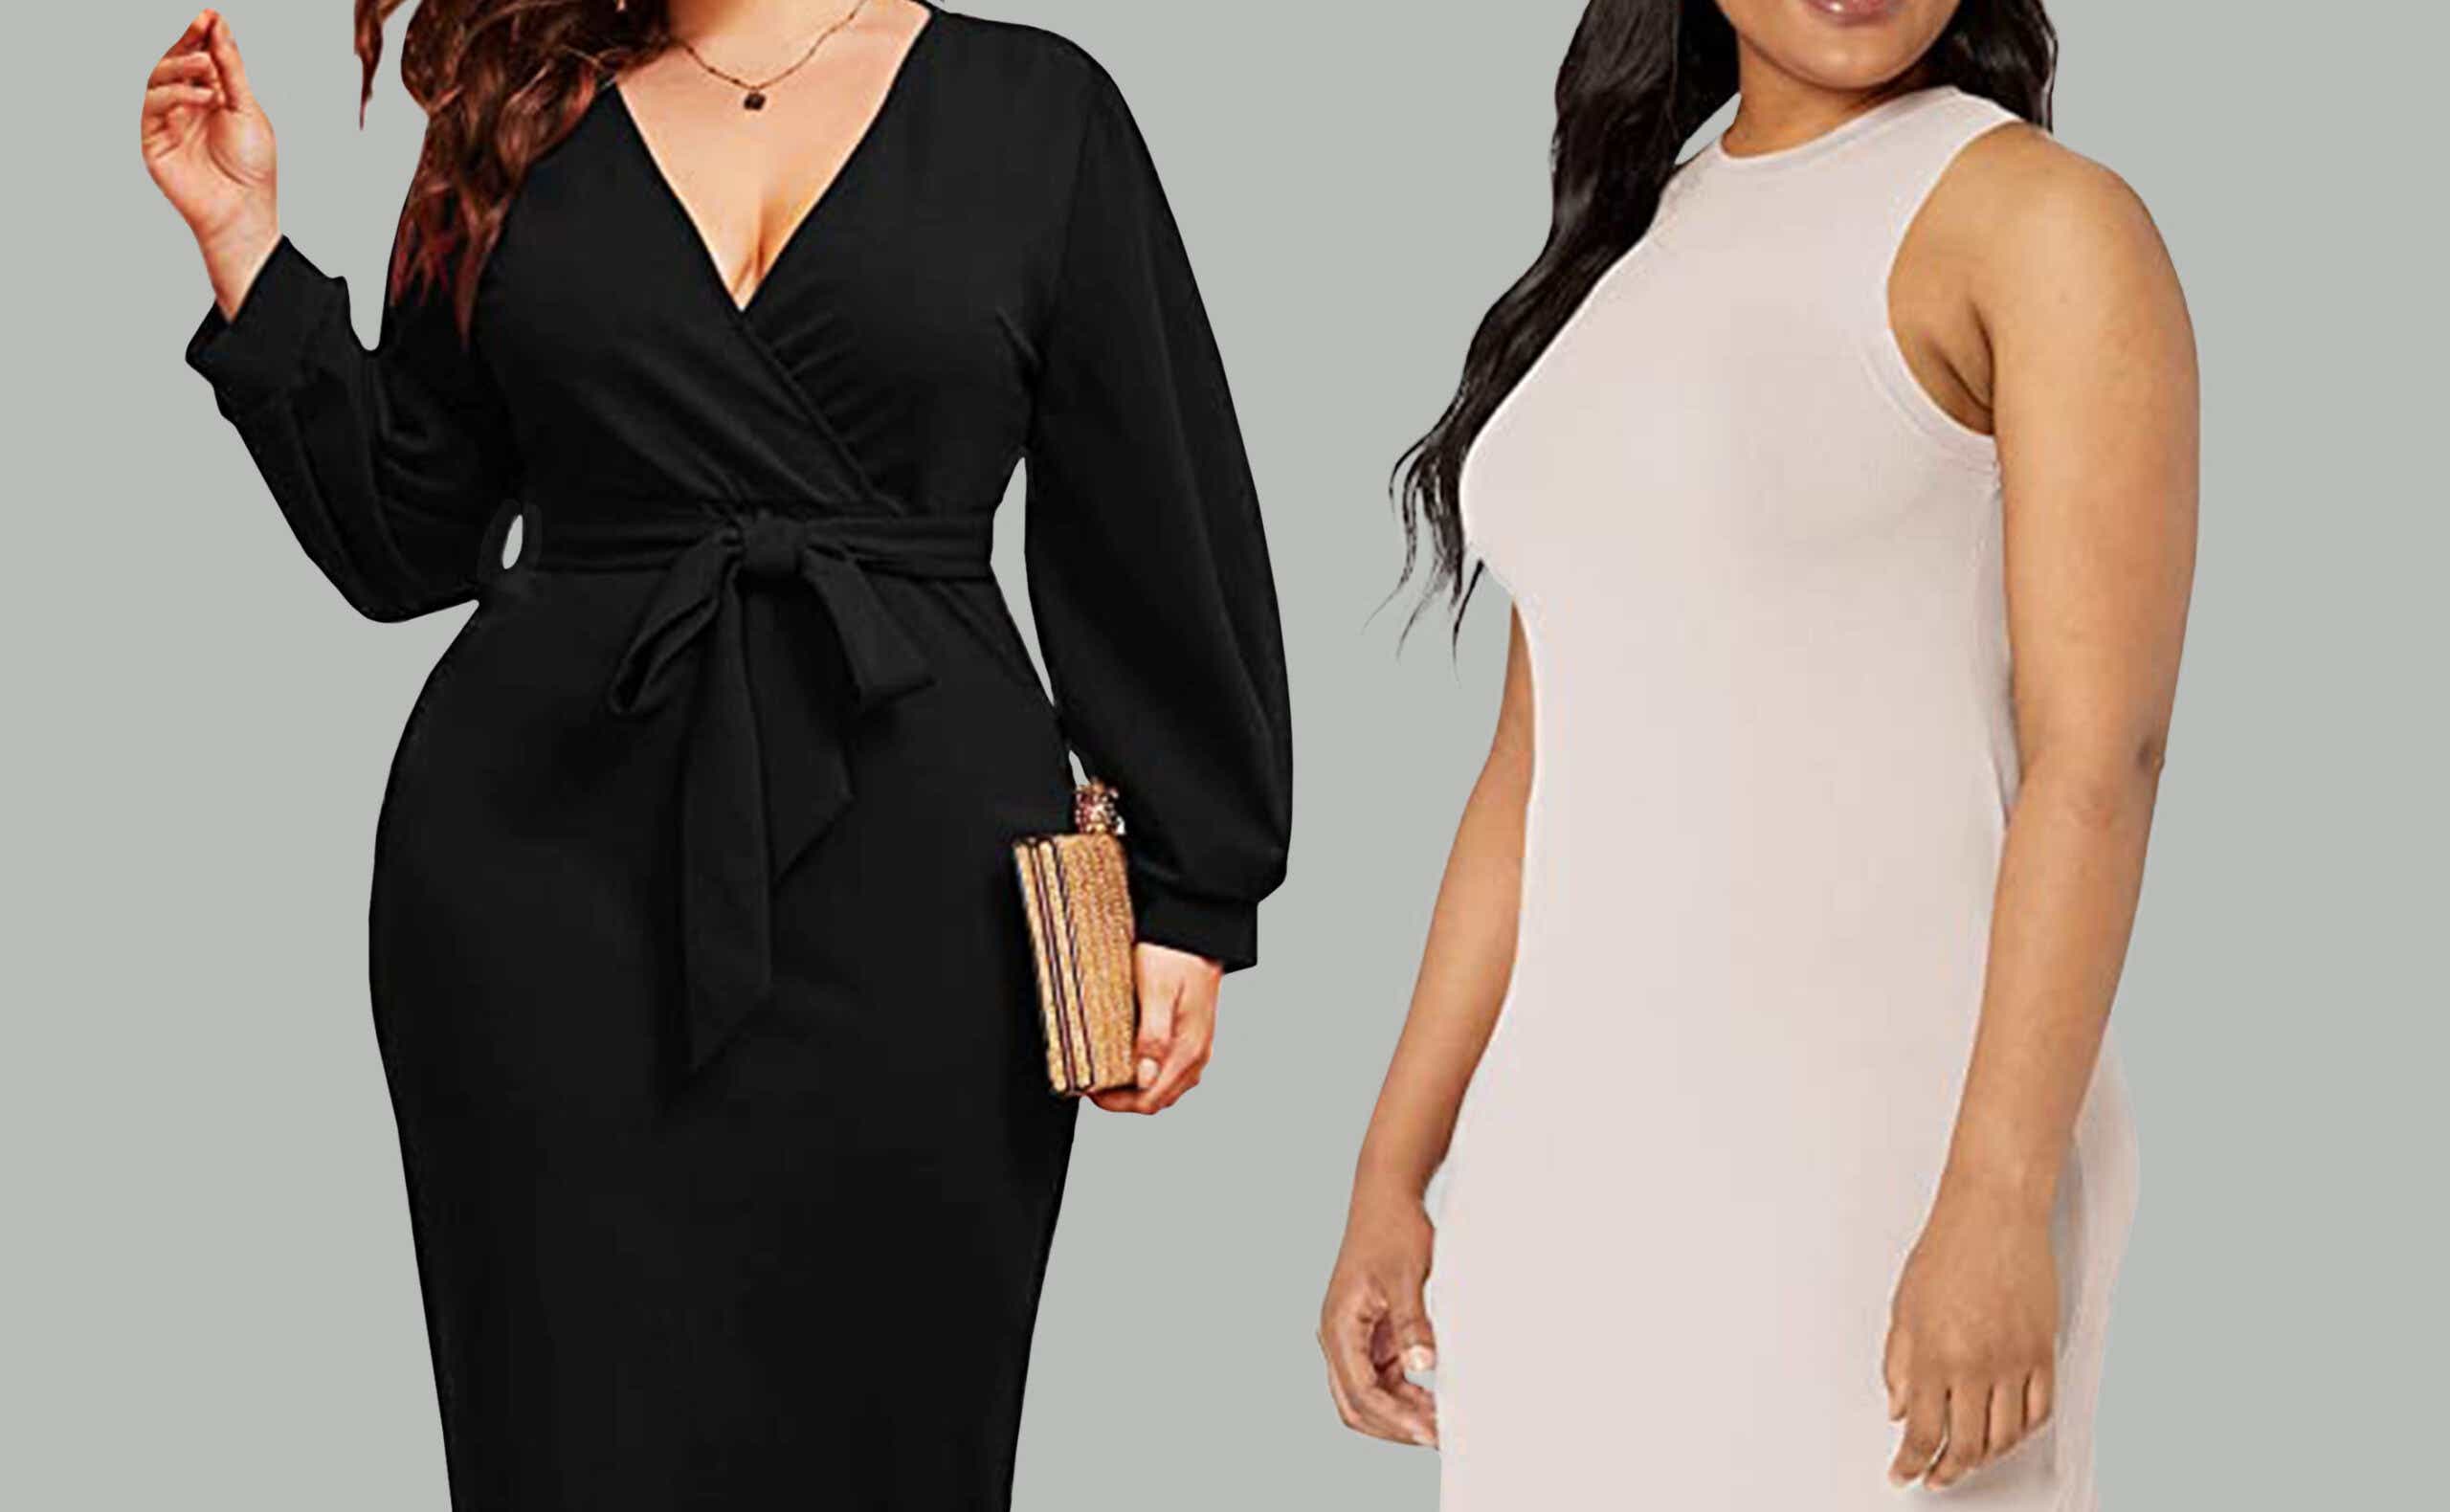 The BEST Dress for Thick Girls